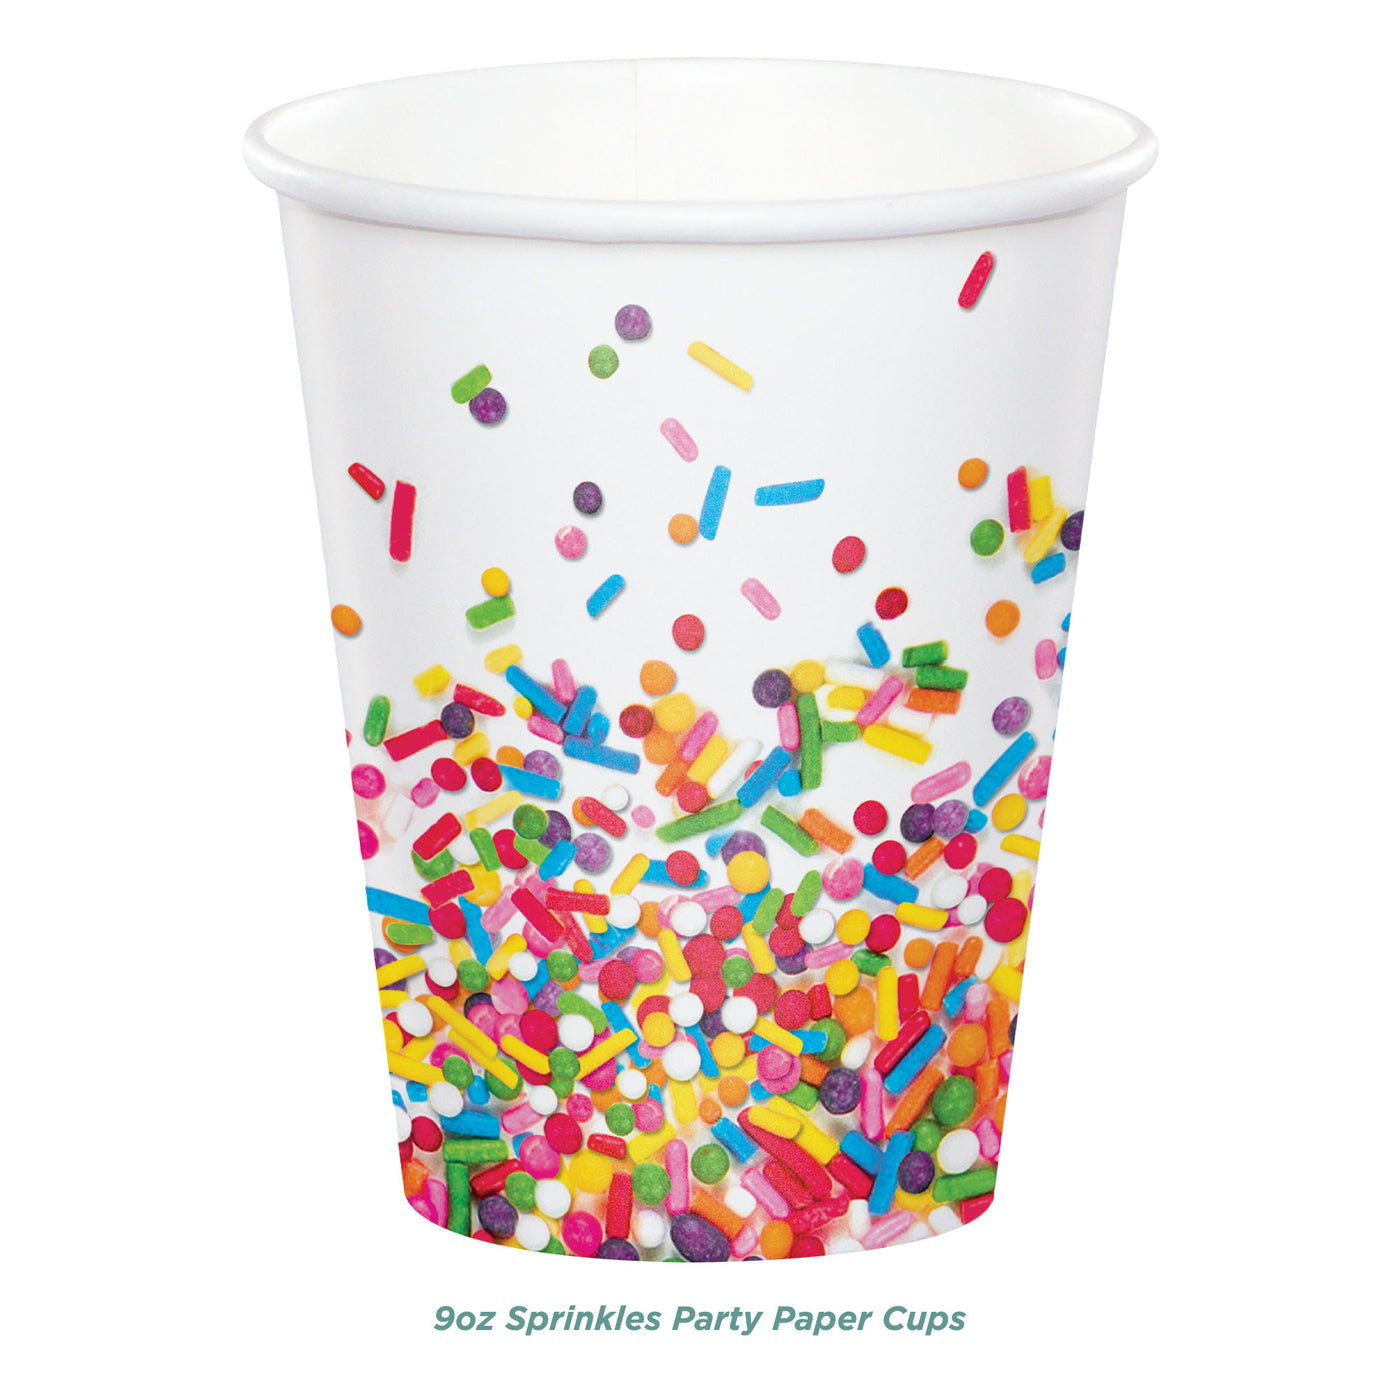 Confetti Candy Sprinkles Dessert Party Pack - Paper Plates, Napkins, Cups, Forks, and Plastic Table Cover Set (Serves 16)